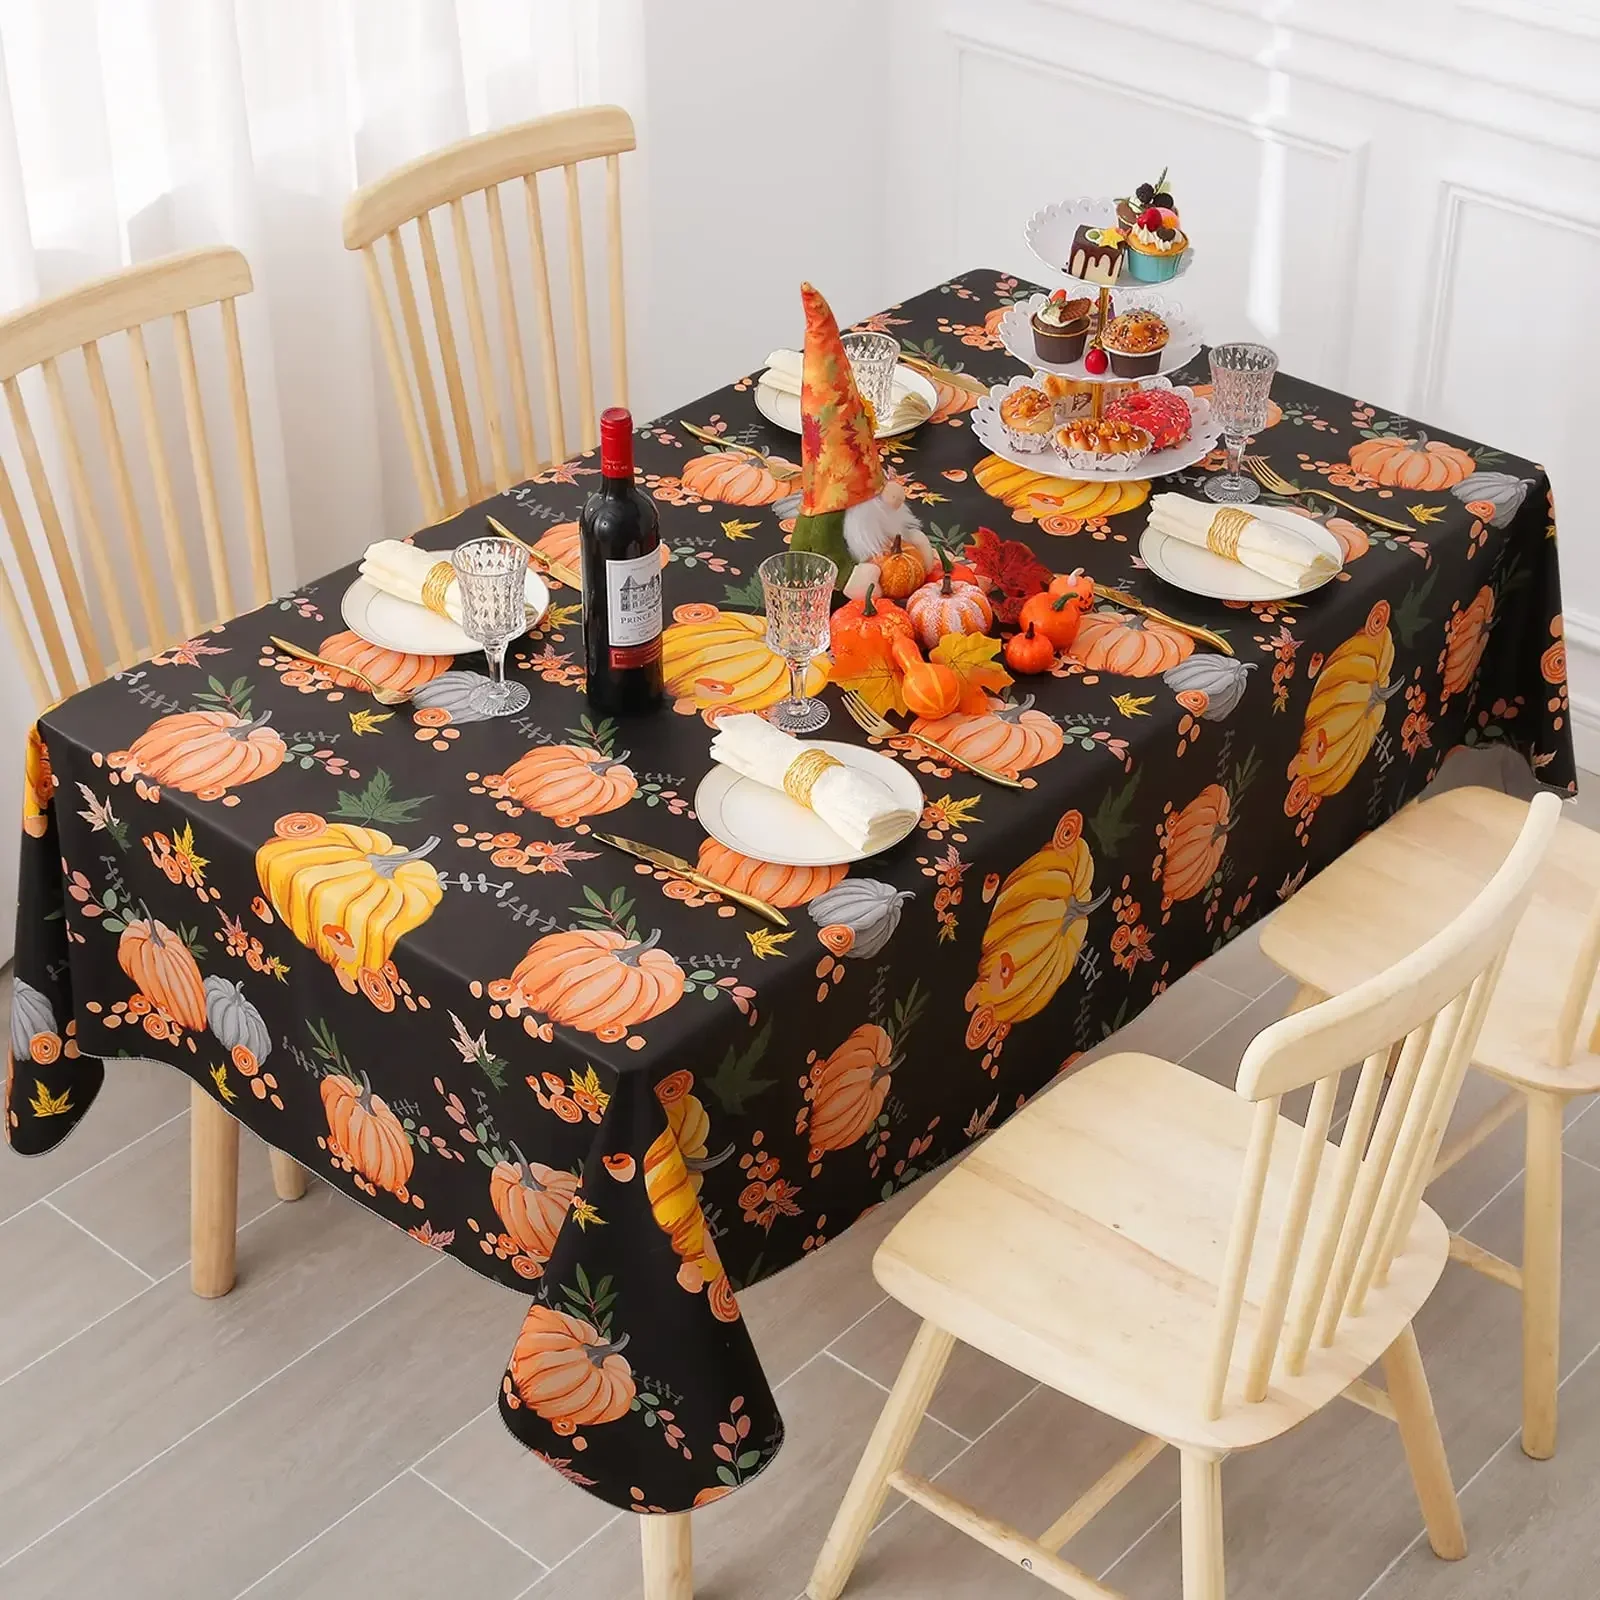 

Classic Pumpkin Print Halloween Rectangular Table Stain Resistant Tablecloth Holiday Party Dinner Party Decoration Cloth